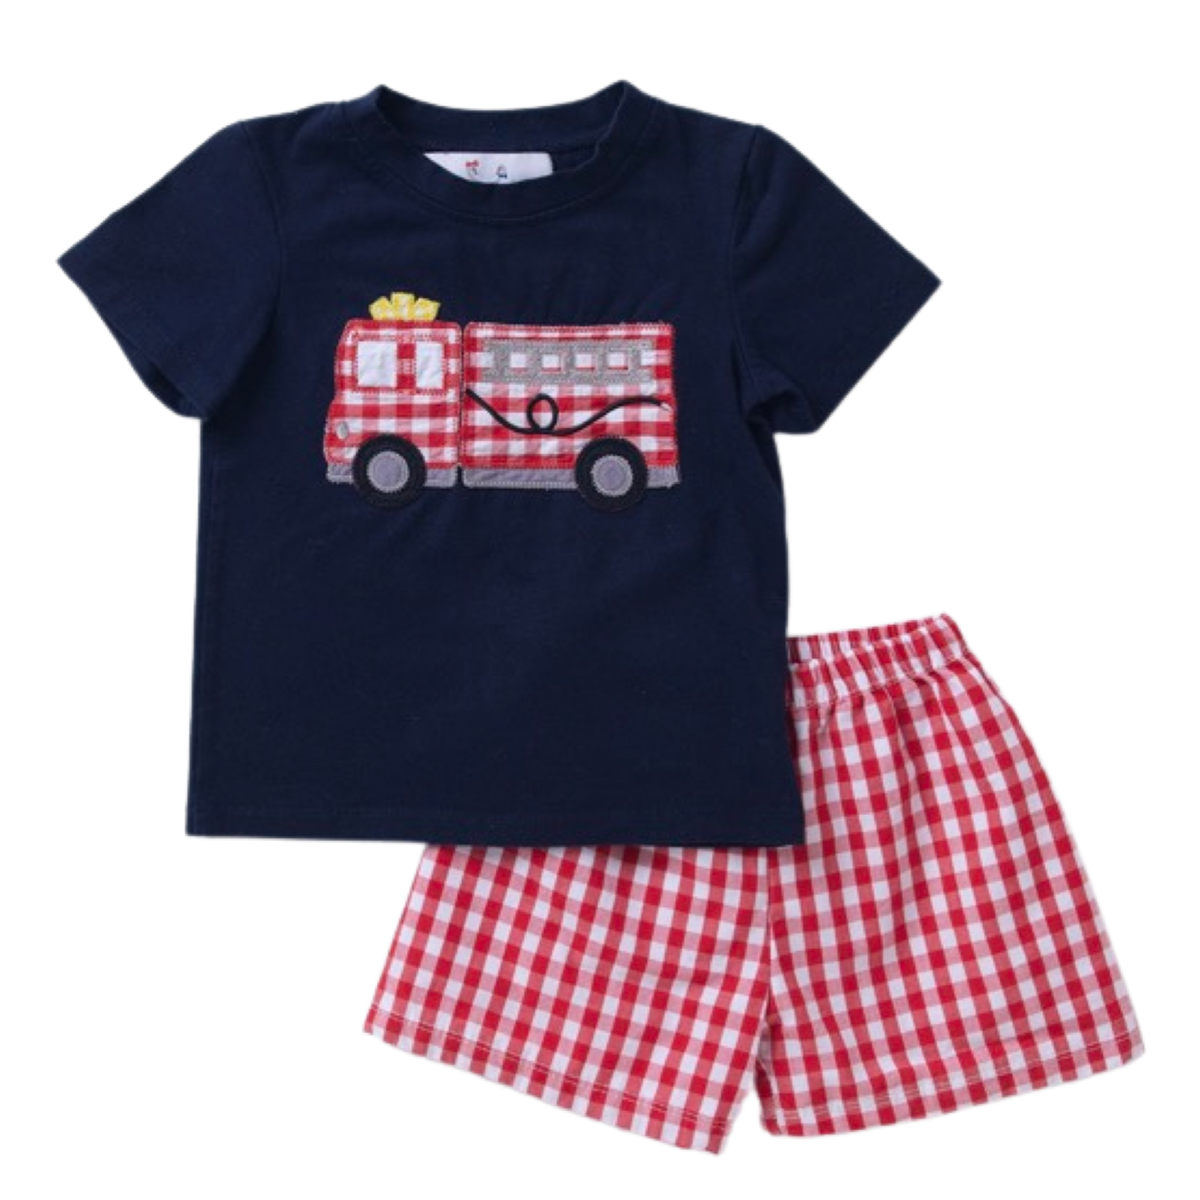 Toddler Boy's Firetruck Appliqued Shorts Set by City Beautiful